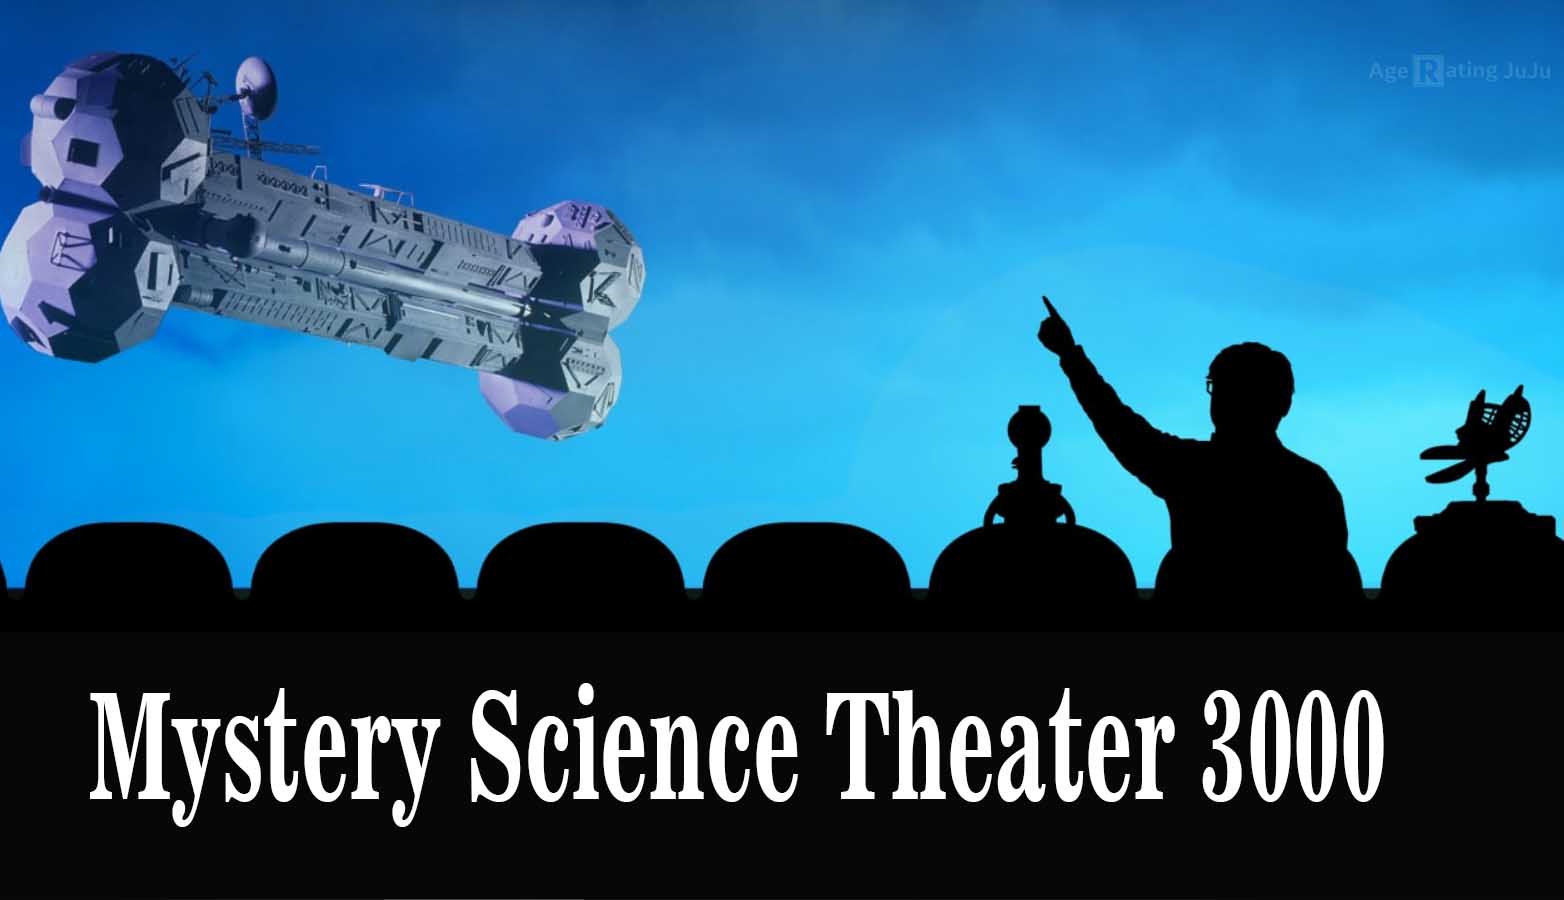 Mystery Science Theater 3000 Age Rating 1999- TV Show Poster Images and Wallpapers